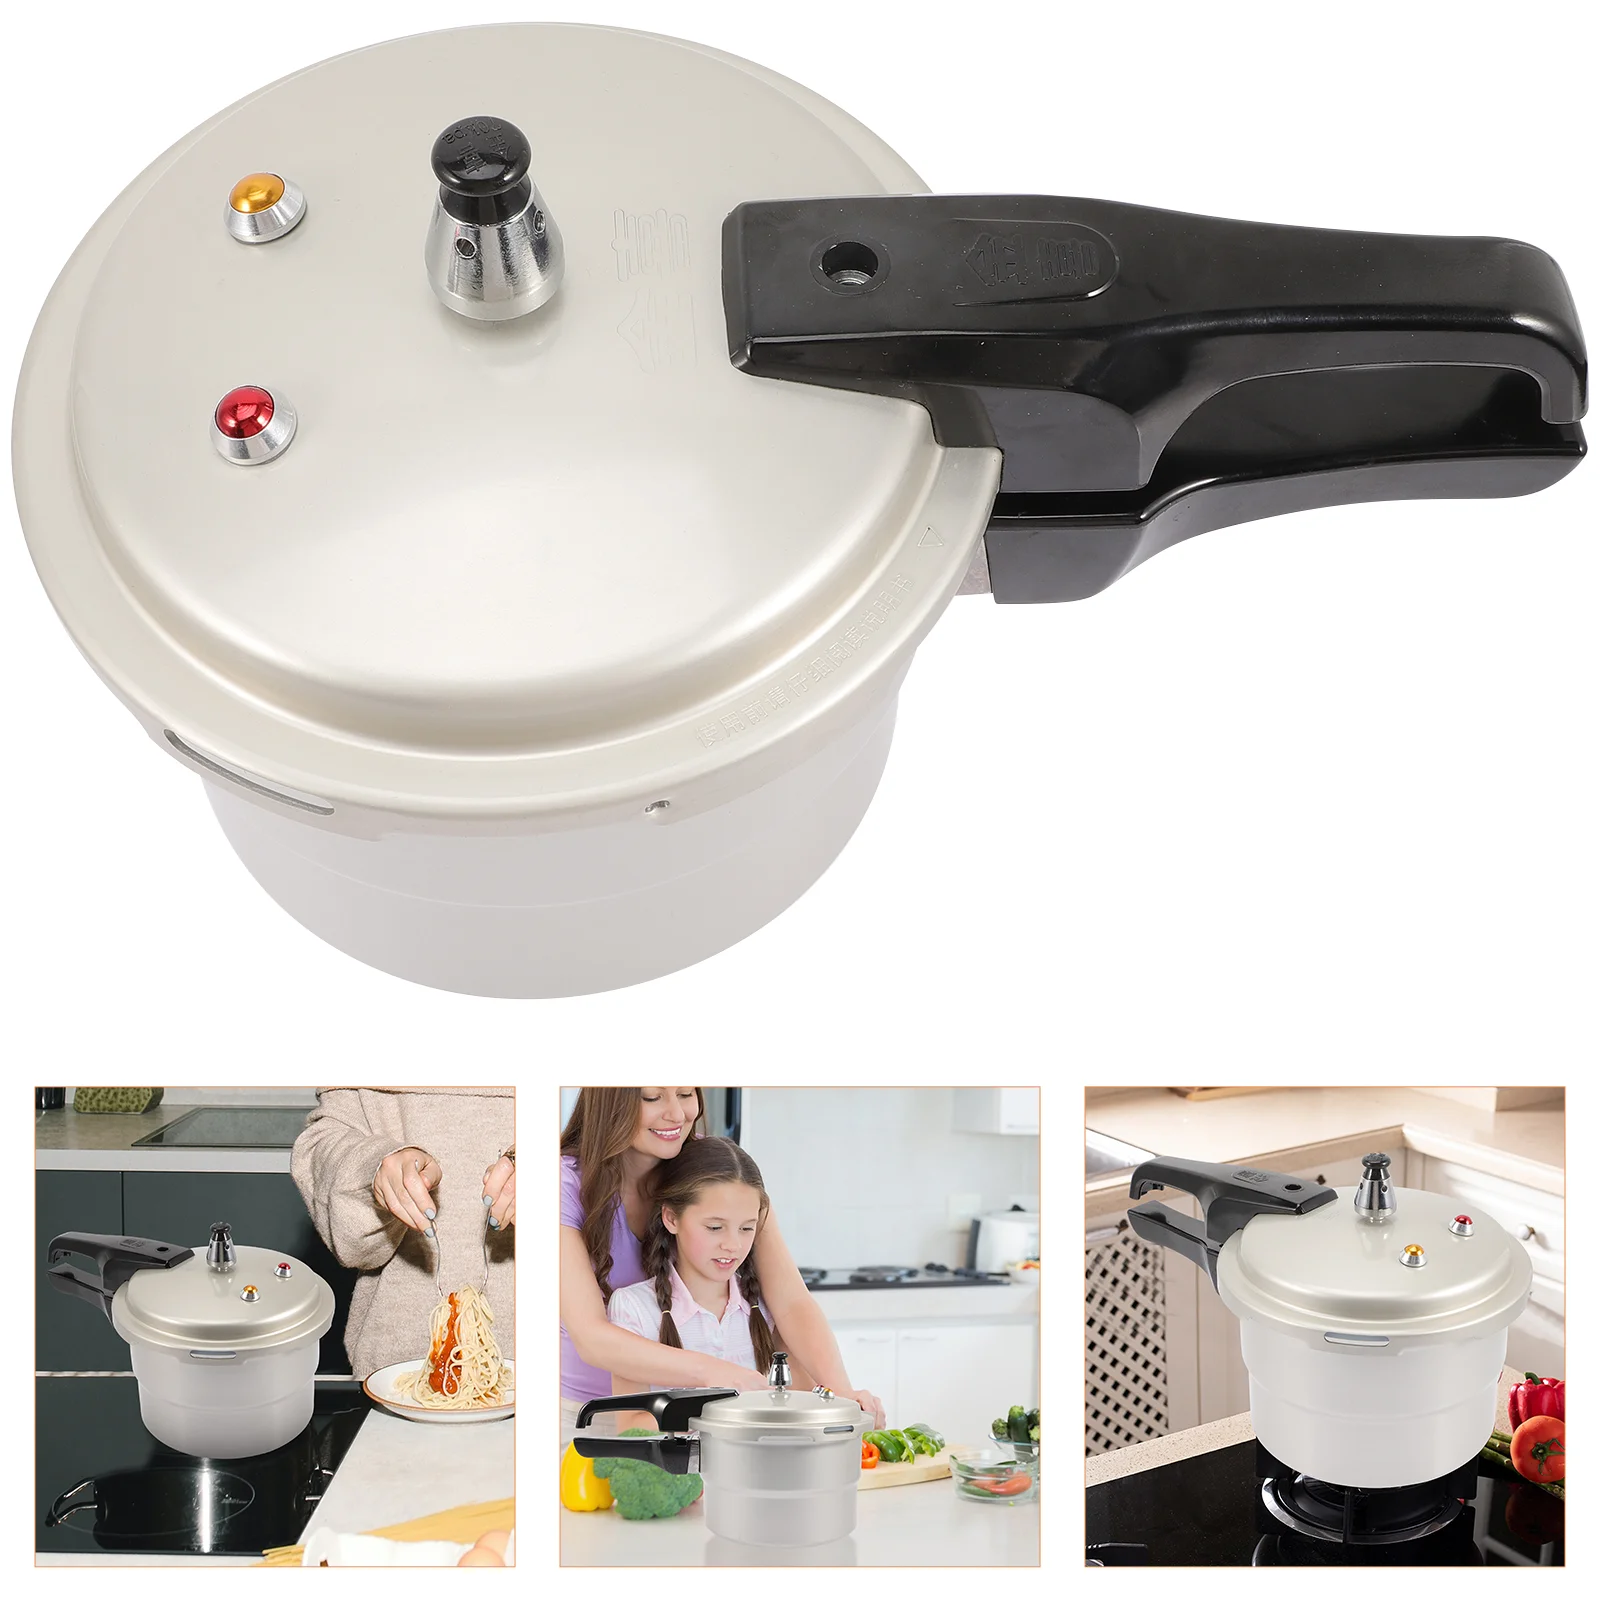 

Pressure Cooker Food-grade Cooking Pot Multipurpose Gas Stove Safe Portable Kitchenware Part Small Electric oven Be